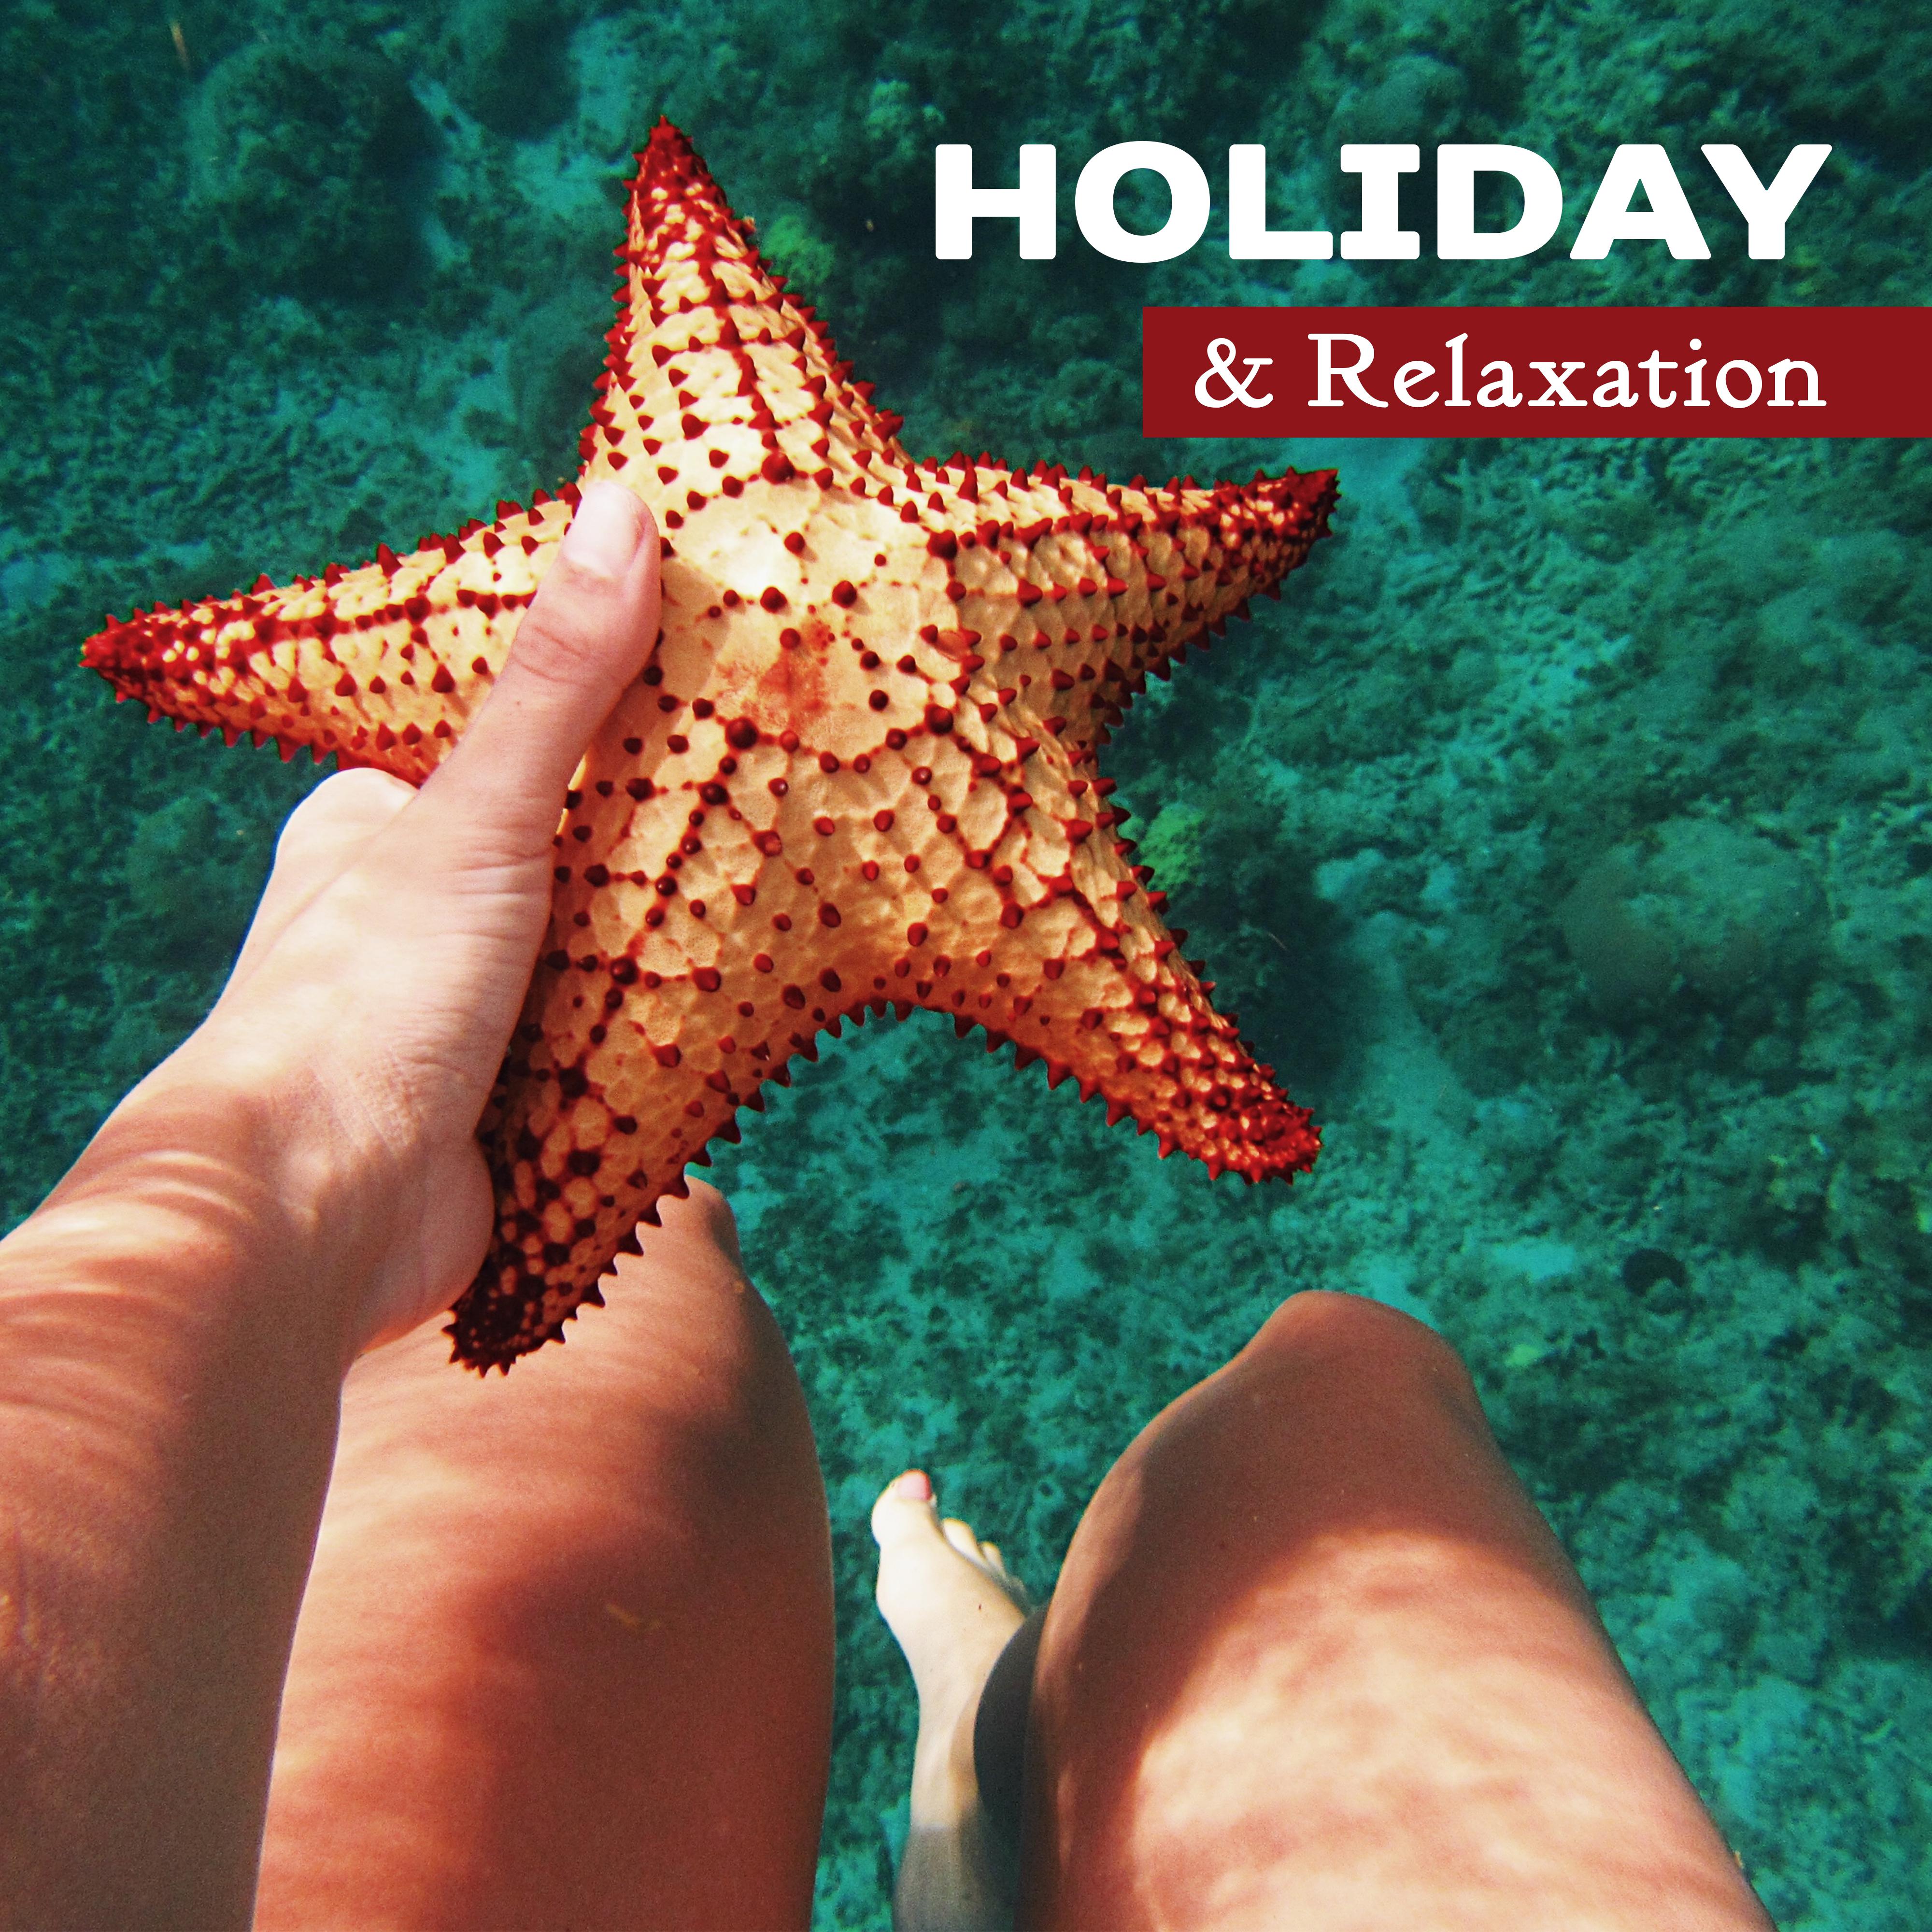 Holiday & Relaxation – Chill Out Music, Deep Sun, Beach Chill, Rest Under Palms, Summertime, Soft Music, Funny Beach